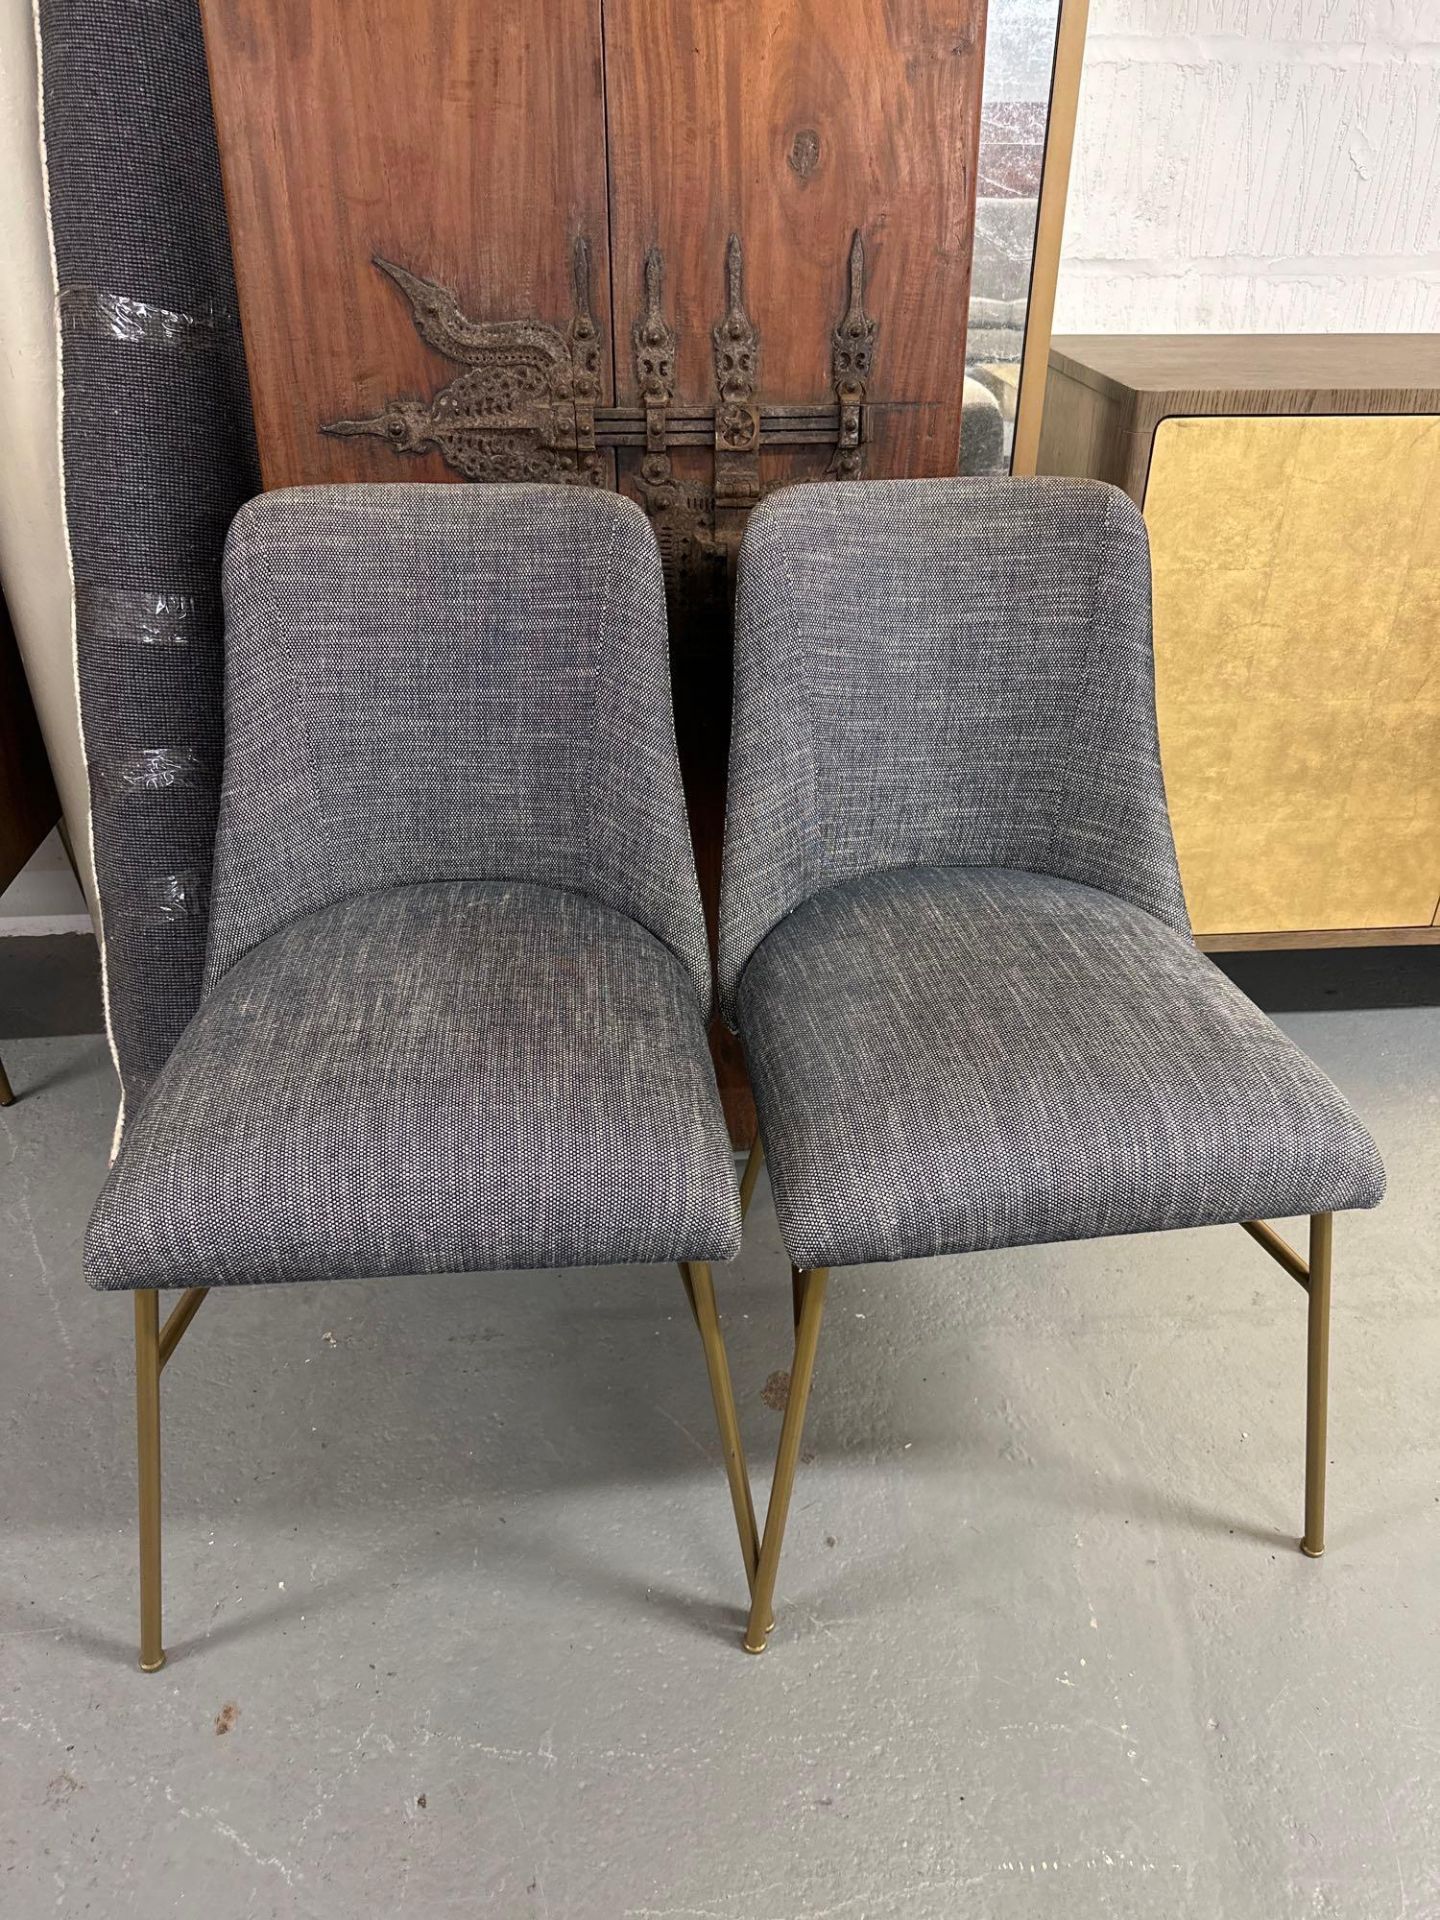 A set of contemporary dining chairs with gold finish effect legs and linen upholstery will add a - Image 2 of 3